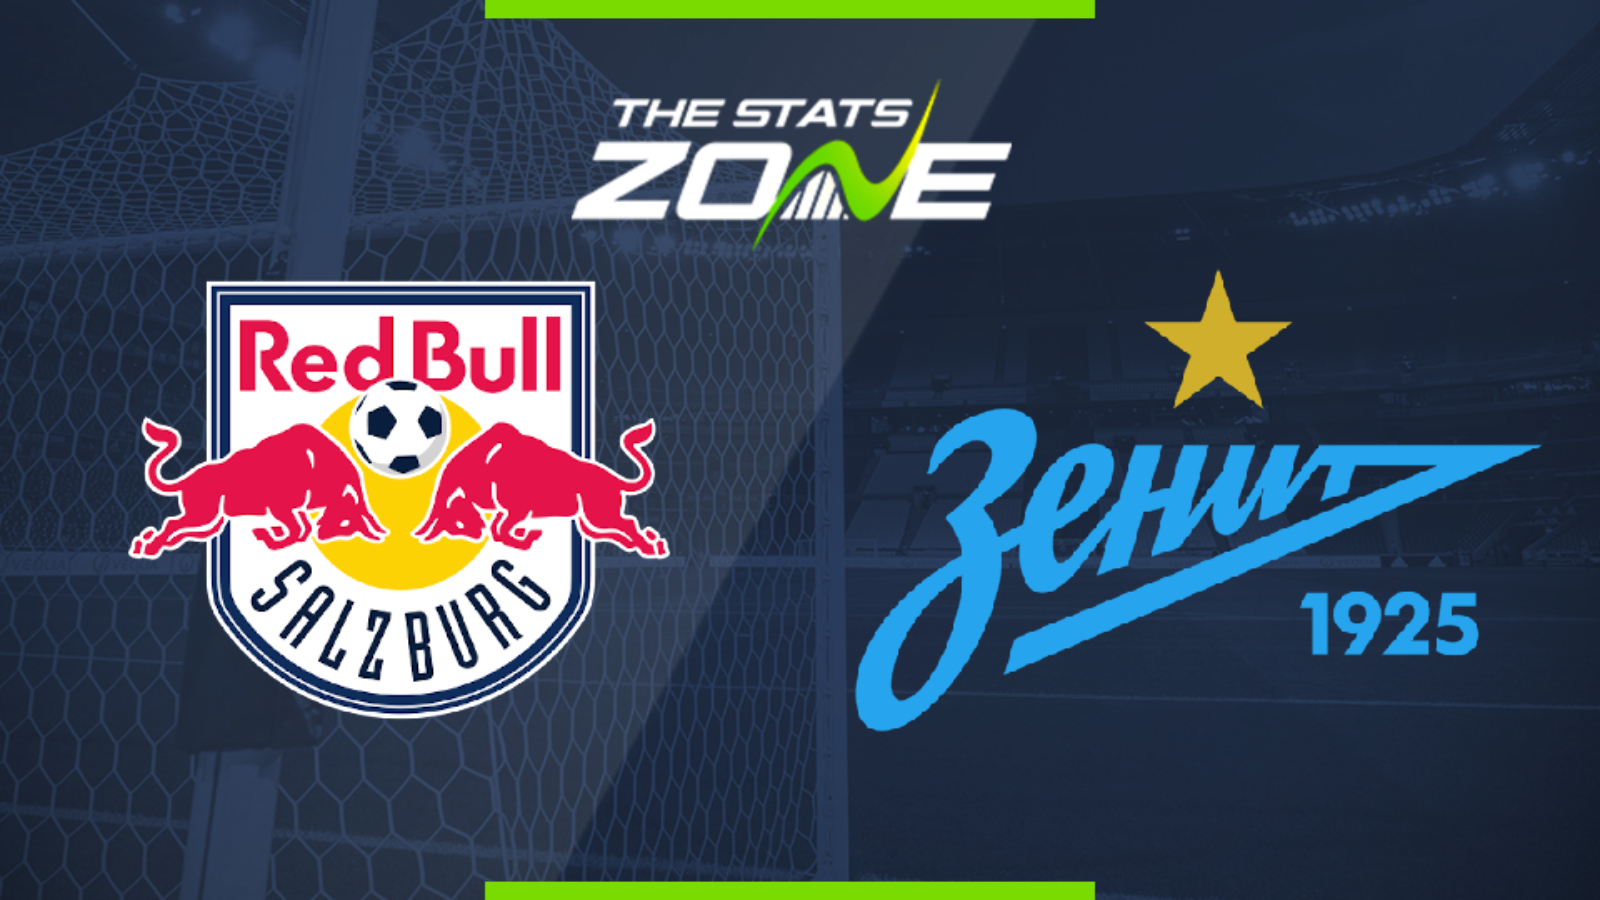 2019-20 UEFA Champions League - RB Leipzig vs Zenit Preview & Prediction - The Stats Zone